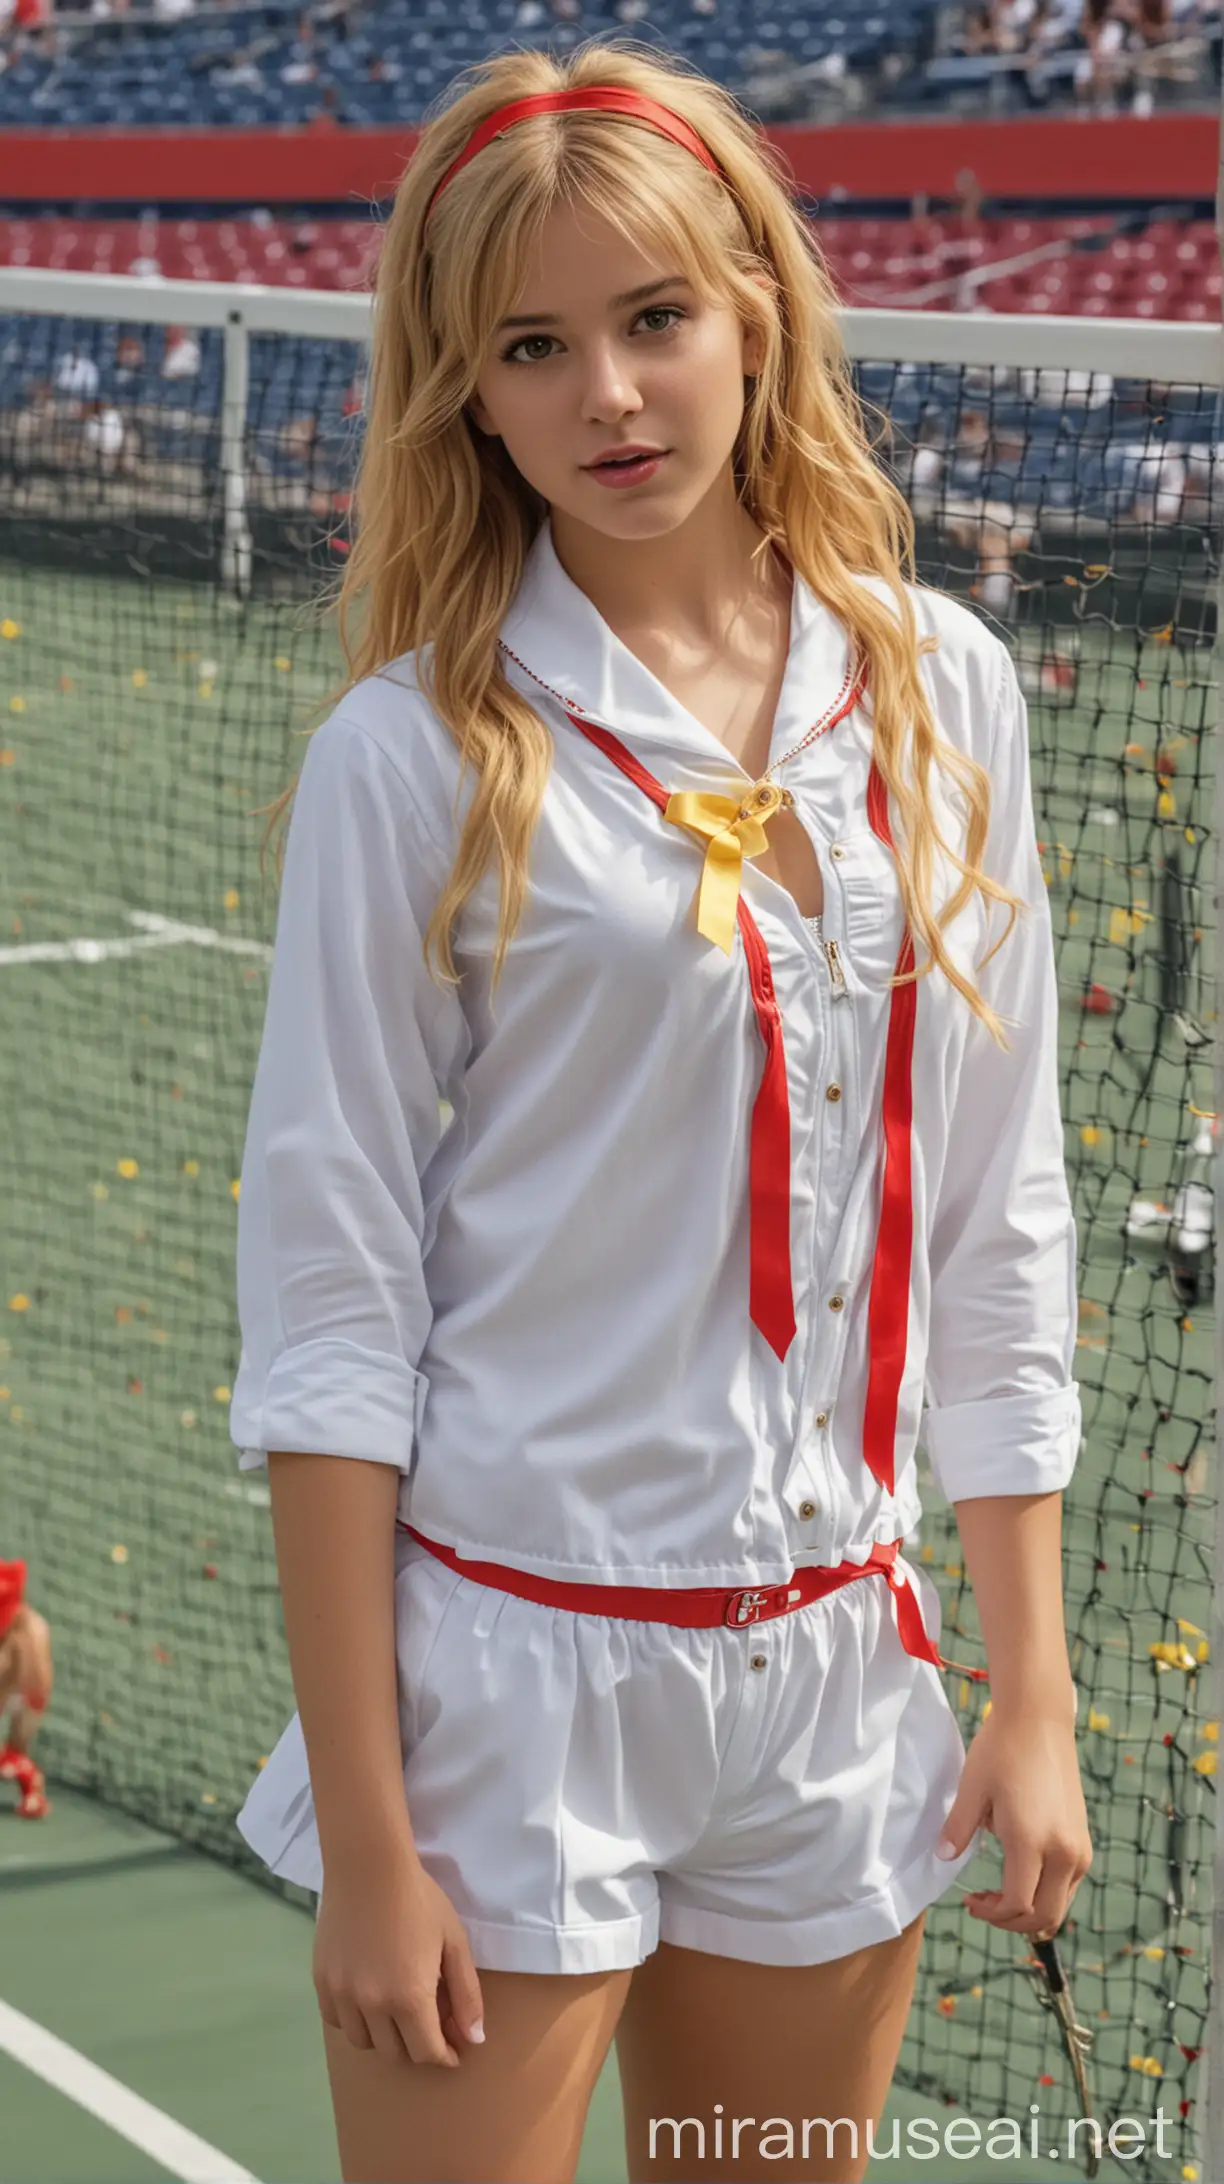 Beautiful American Tennis Spectator with Golden Hair and Red Ribbon Accessories